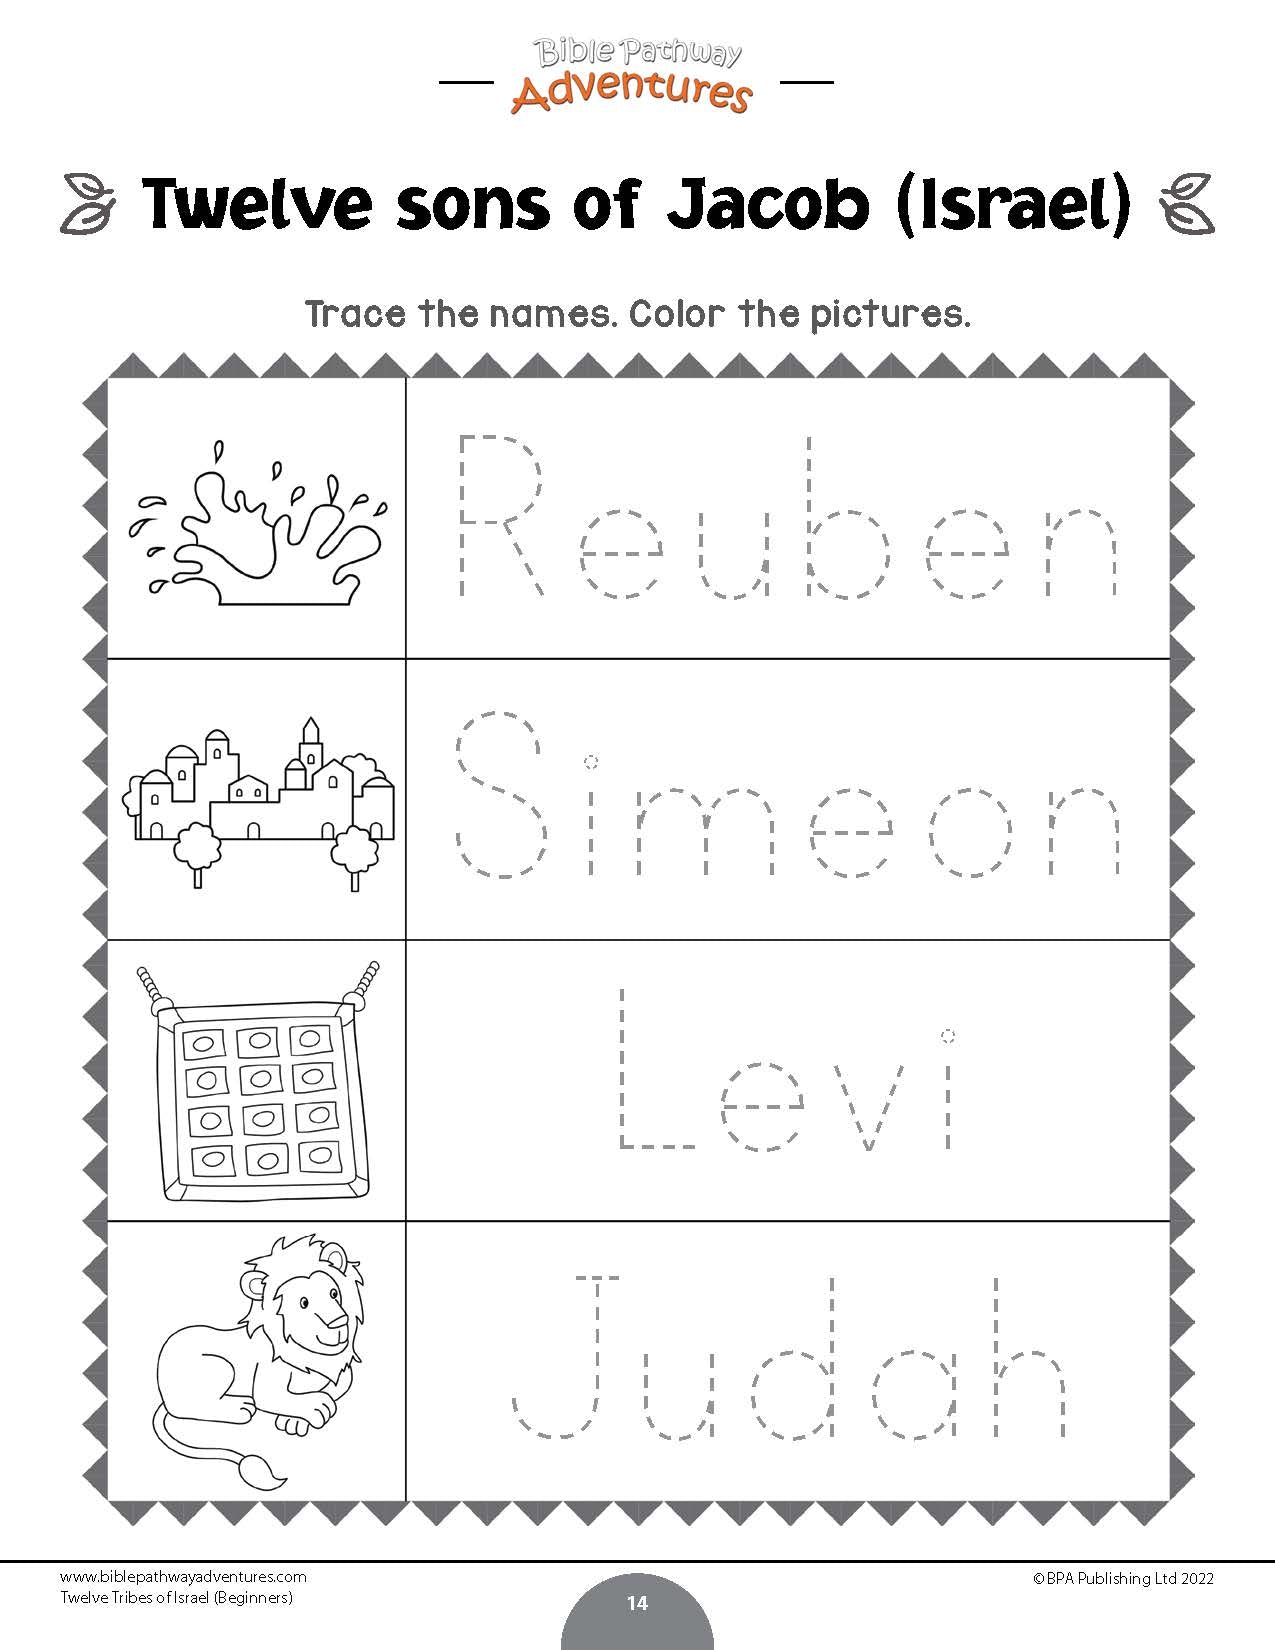 Twelve Tribes of Israel Activity Book for Beginners (paperback)